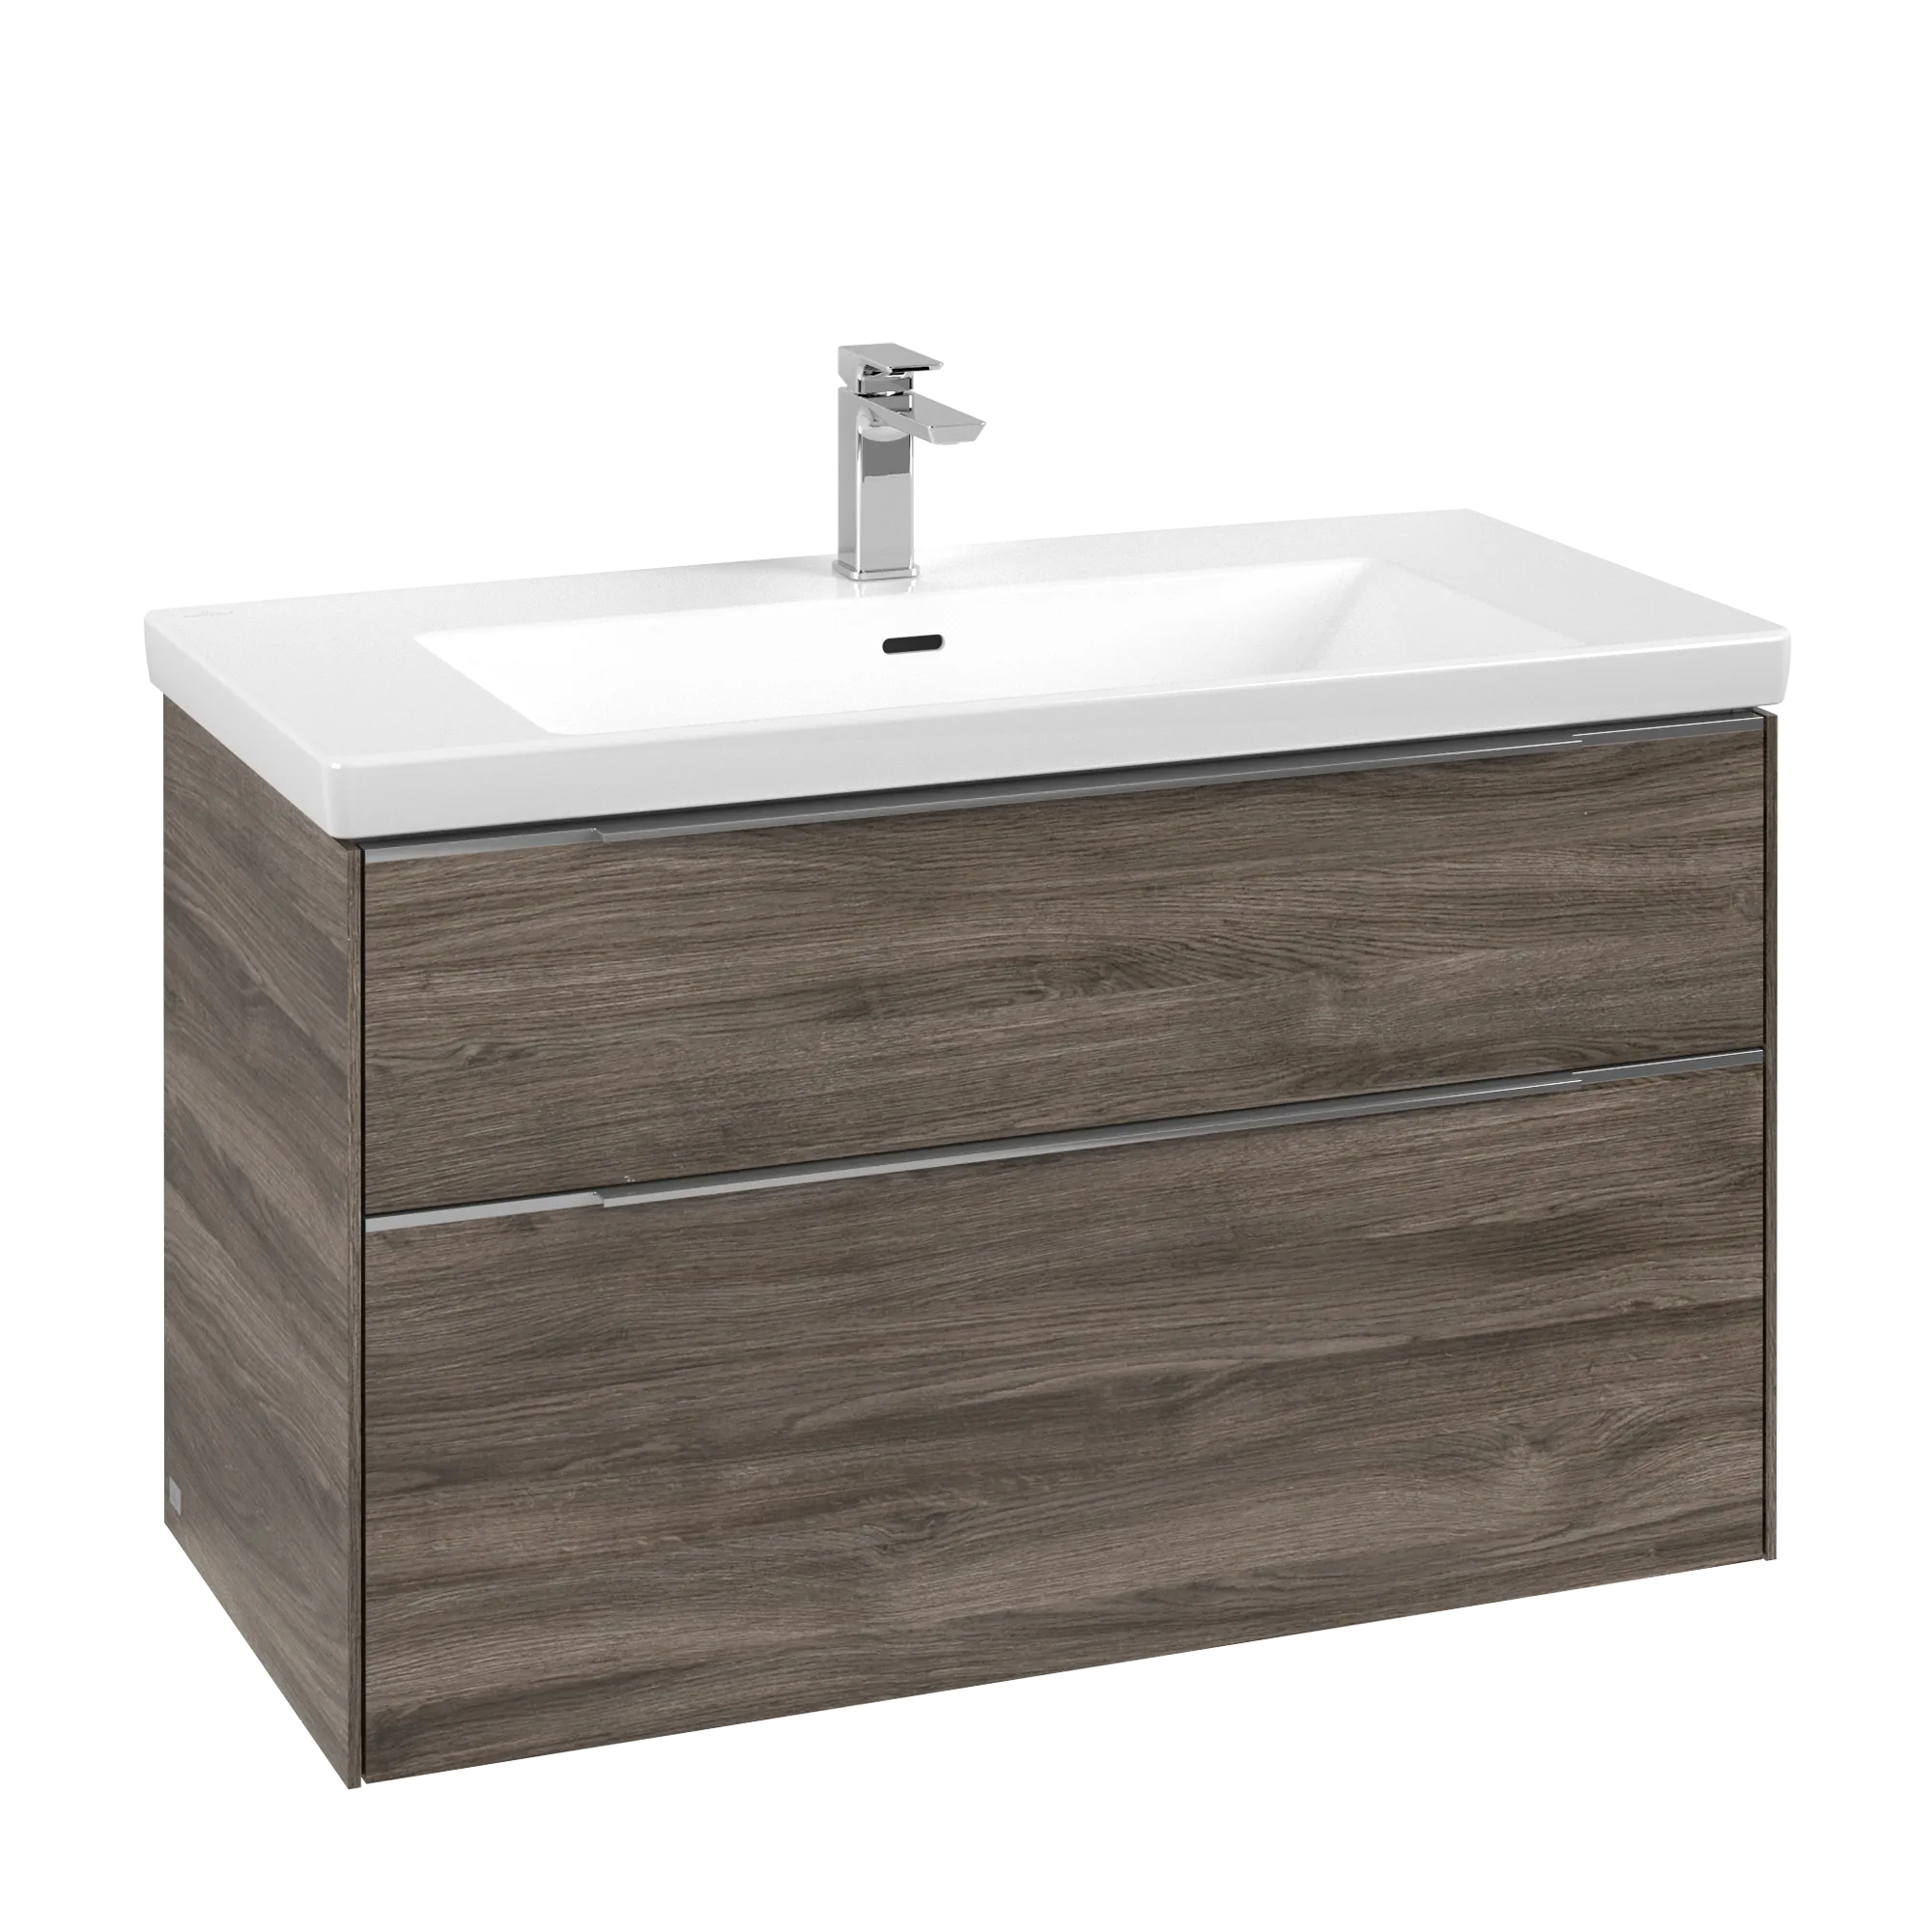 Picture of VILLEROY BOCH Subway 3.0 Vanity unit, with lighting, 2 pull-out compartments, 973 x 576 x 478 mm, Stone Oak #C570L0RK